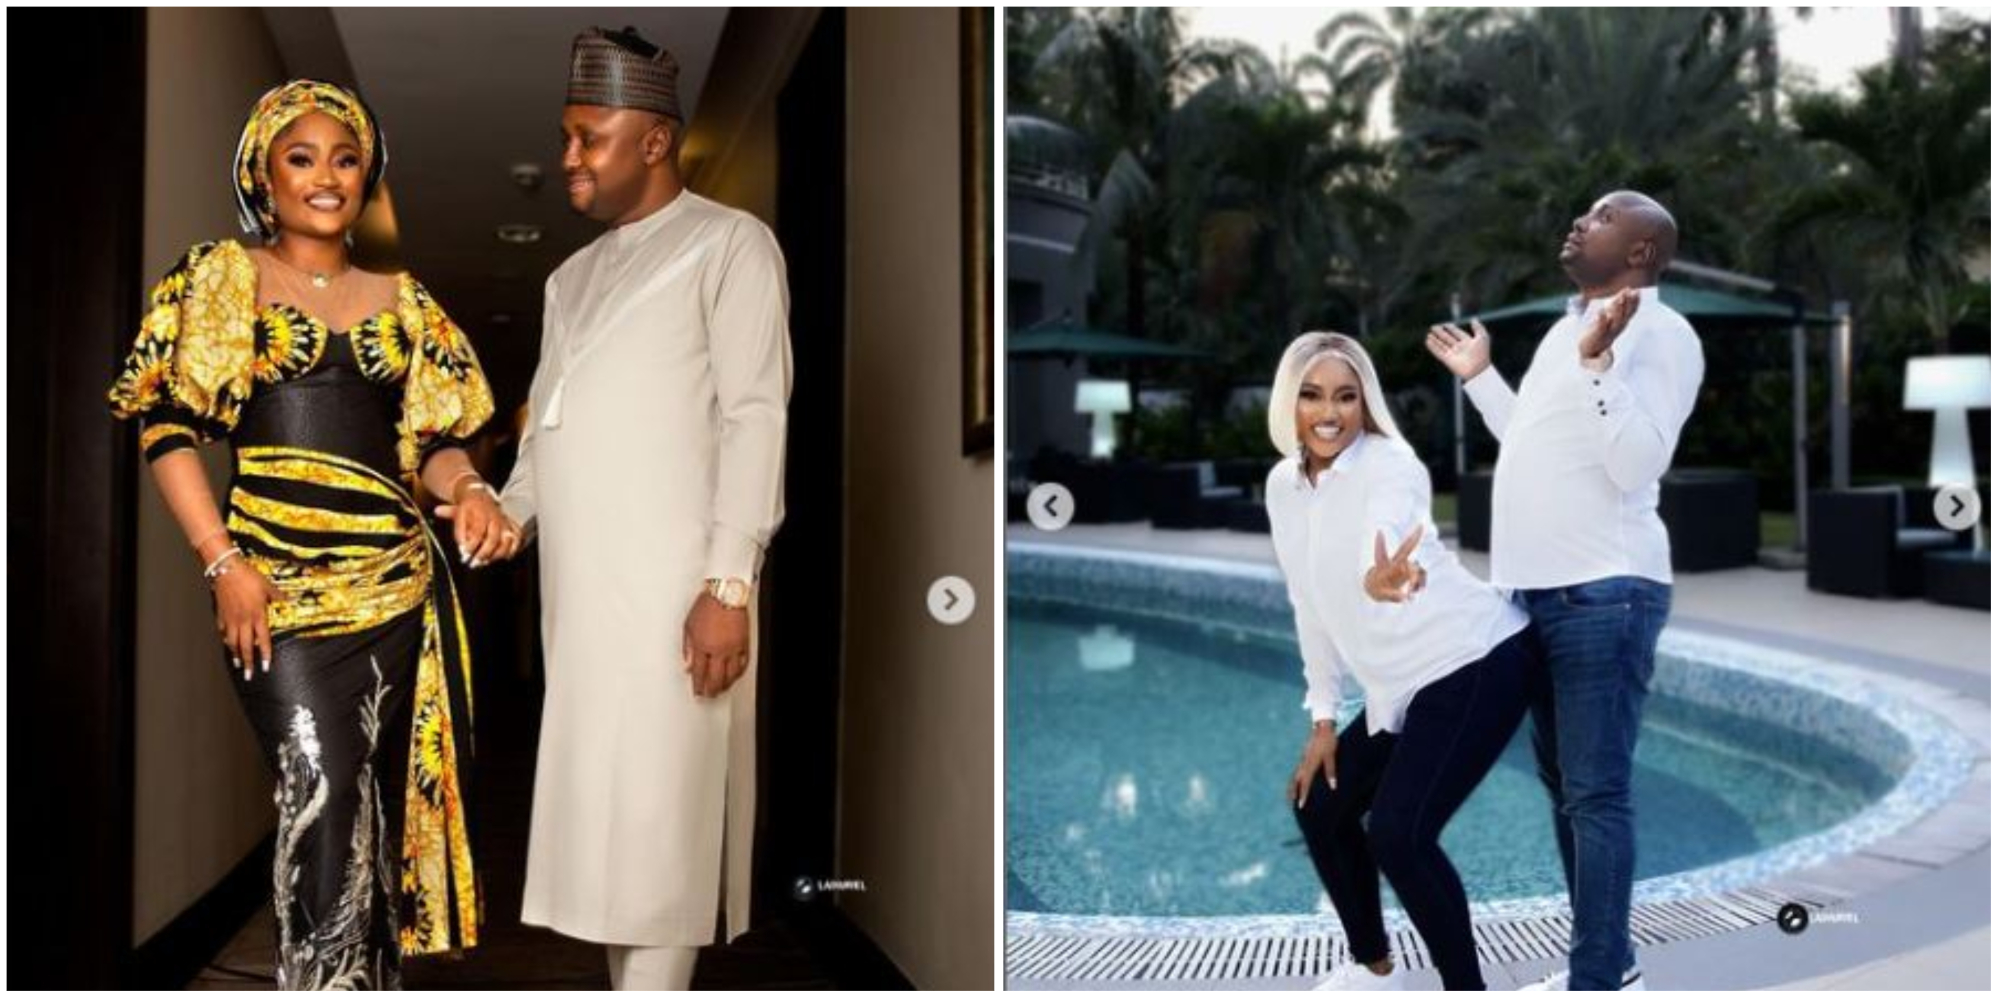 Isreal DMW set to wed as fiancée releases pre-wedding photos